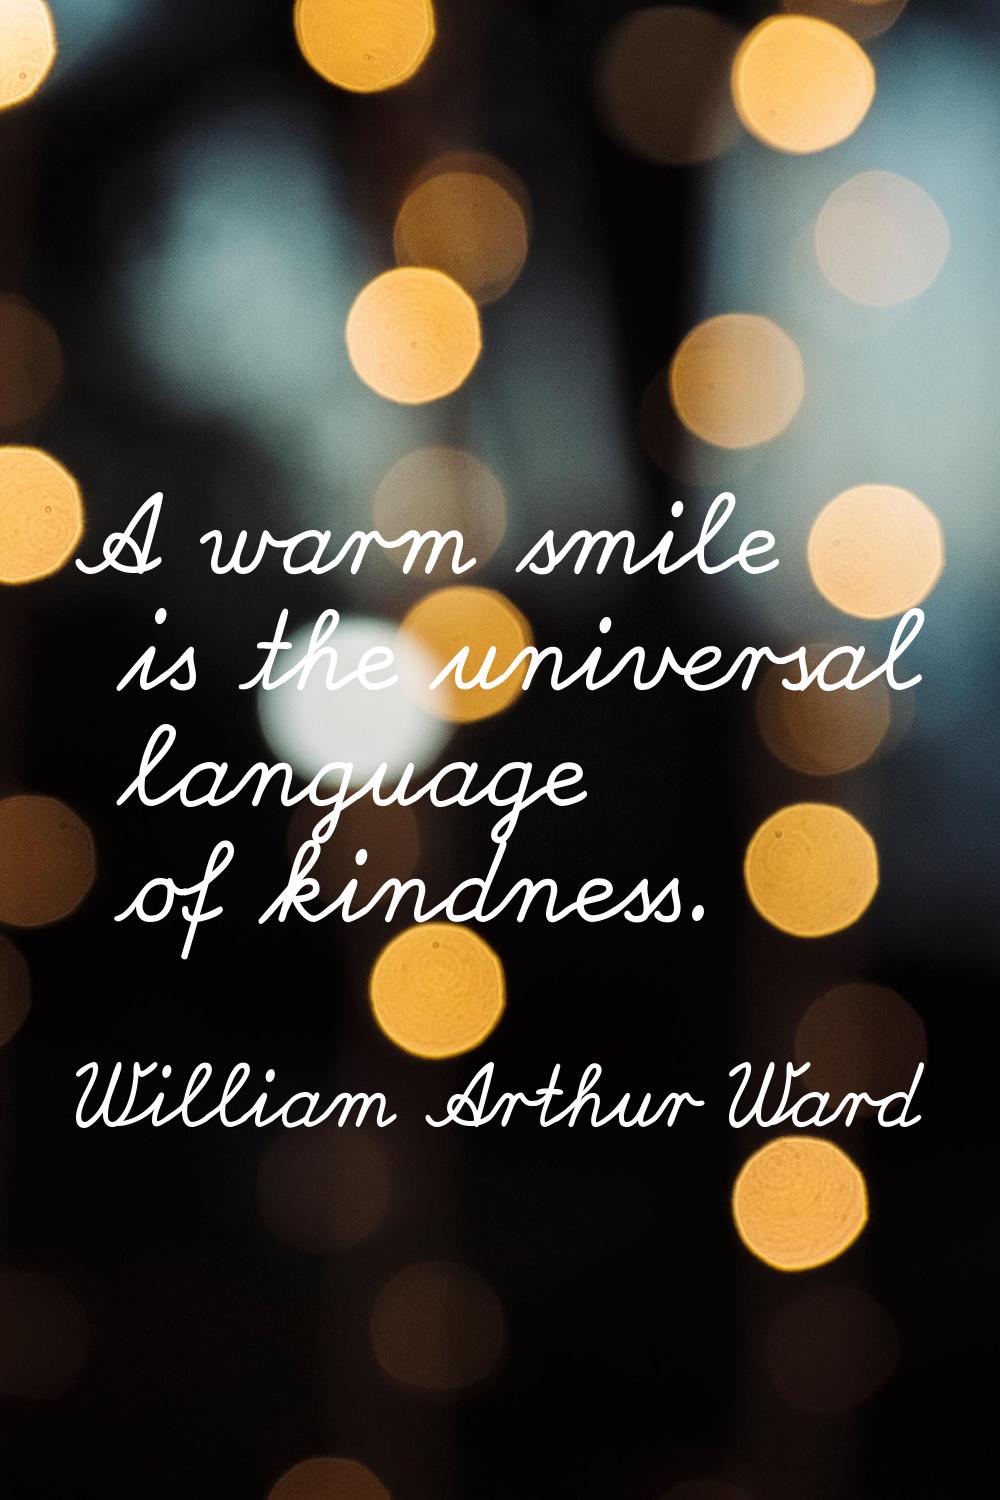 A warm smile is the universal language of kindness.